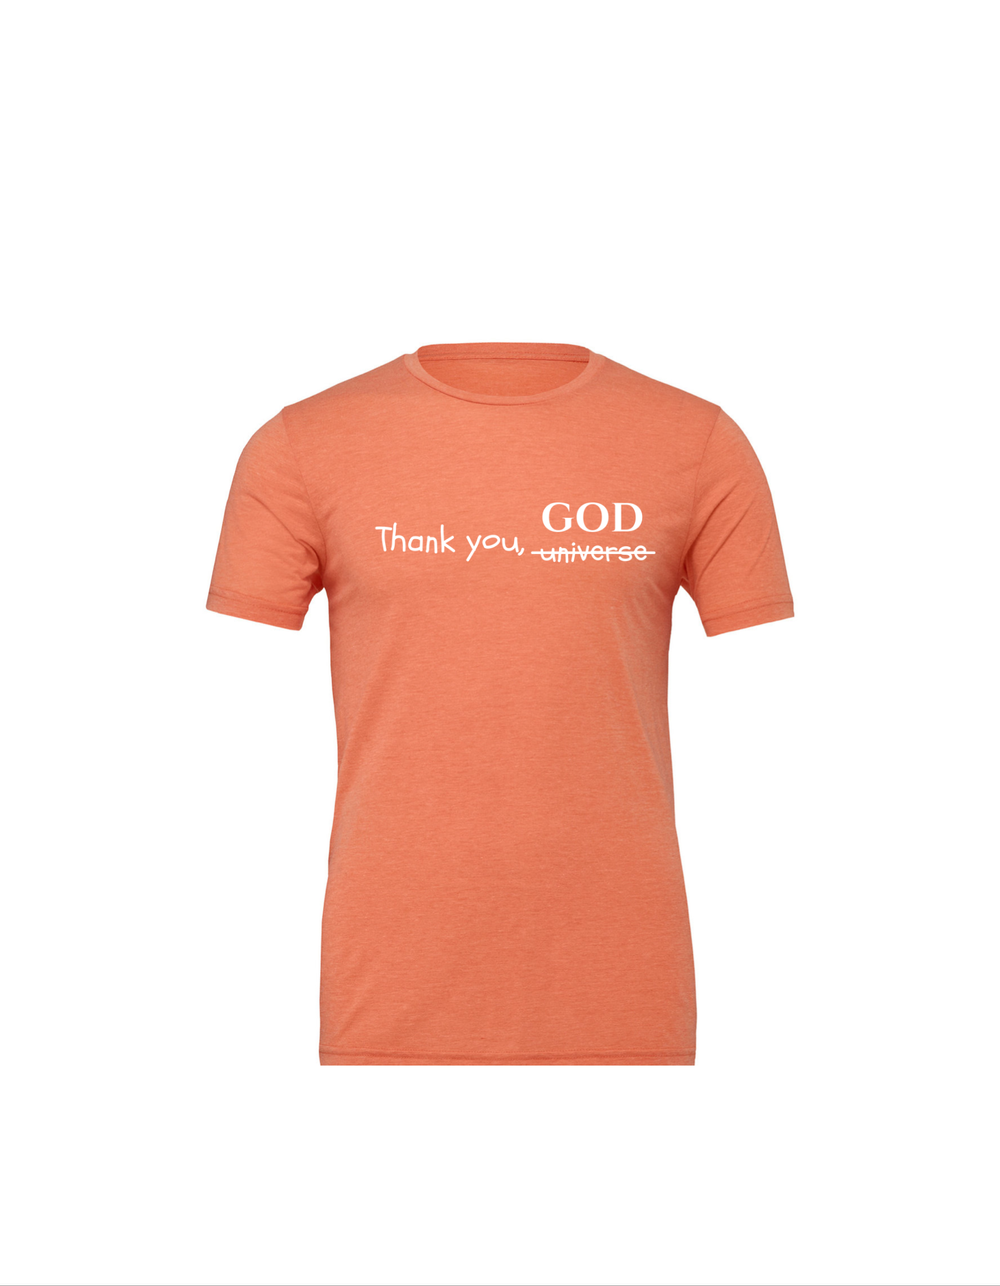 “Thank God not the universe” Tees